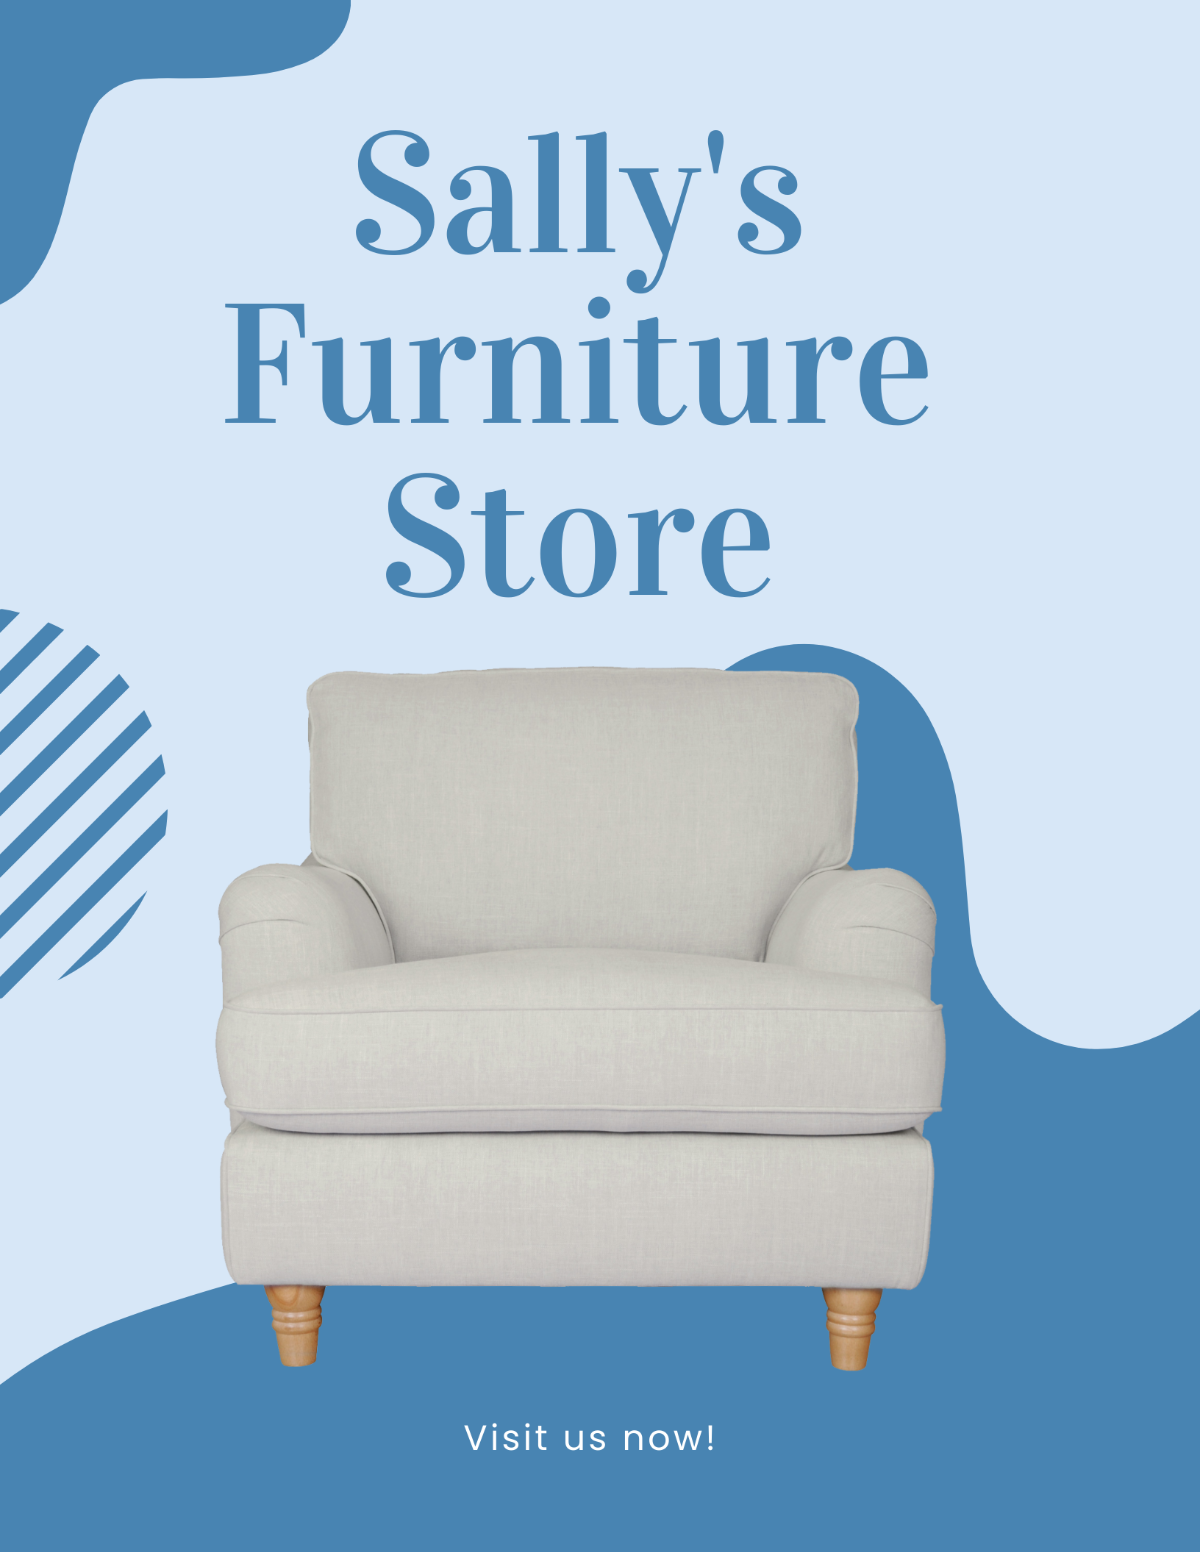 Furniture Store Flyer Template